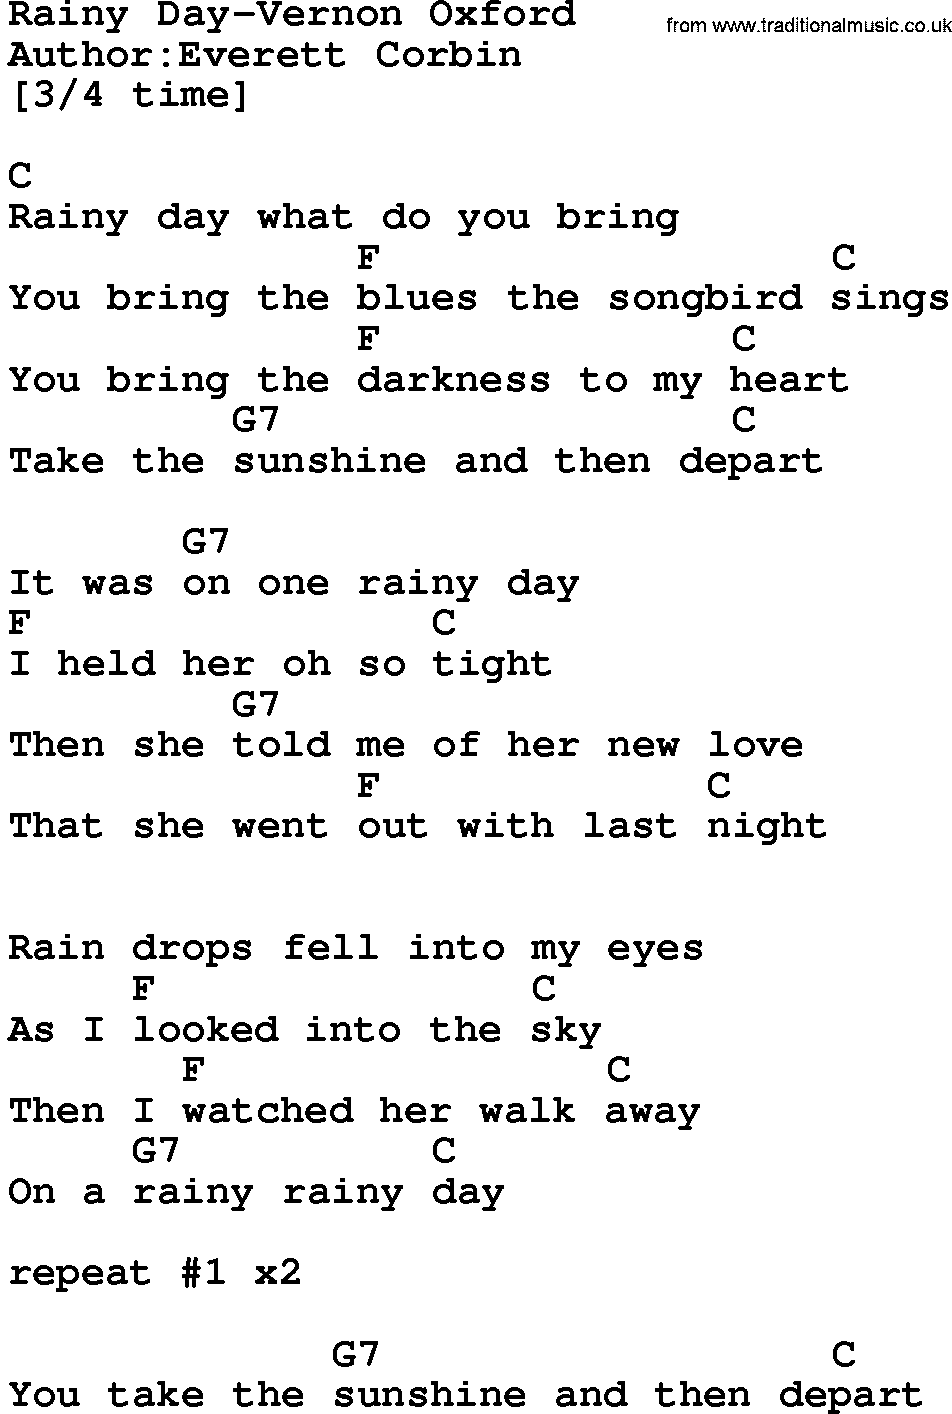 Country music song: Rainy Day-Vernon Oxford lyrics and chords